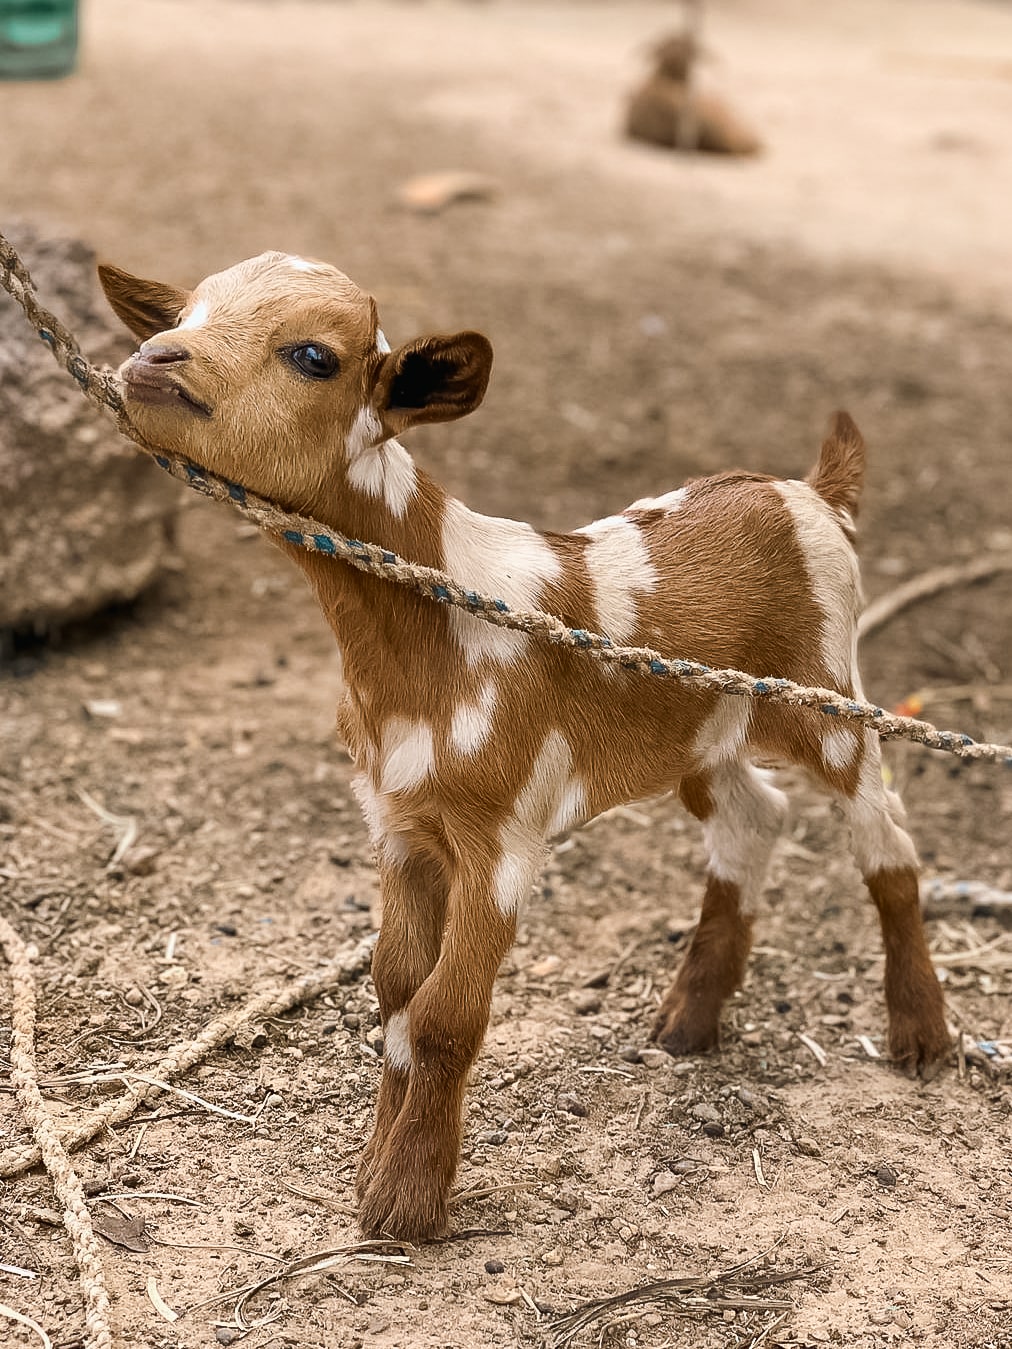 Small goat with his head resting on a rope